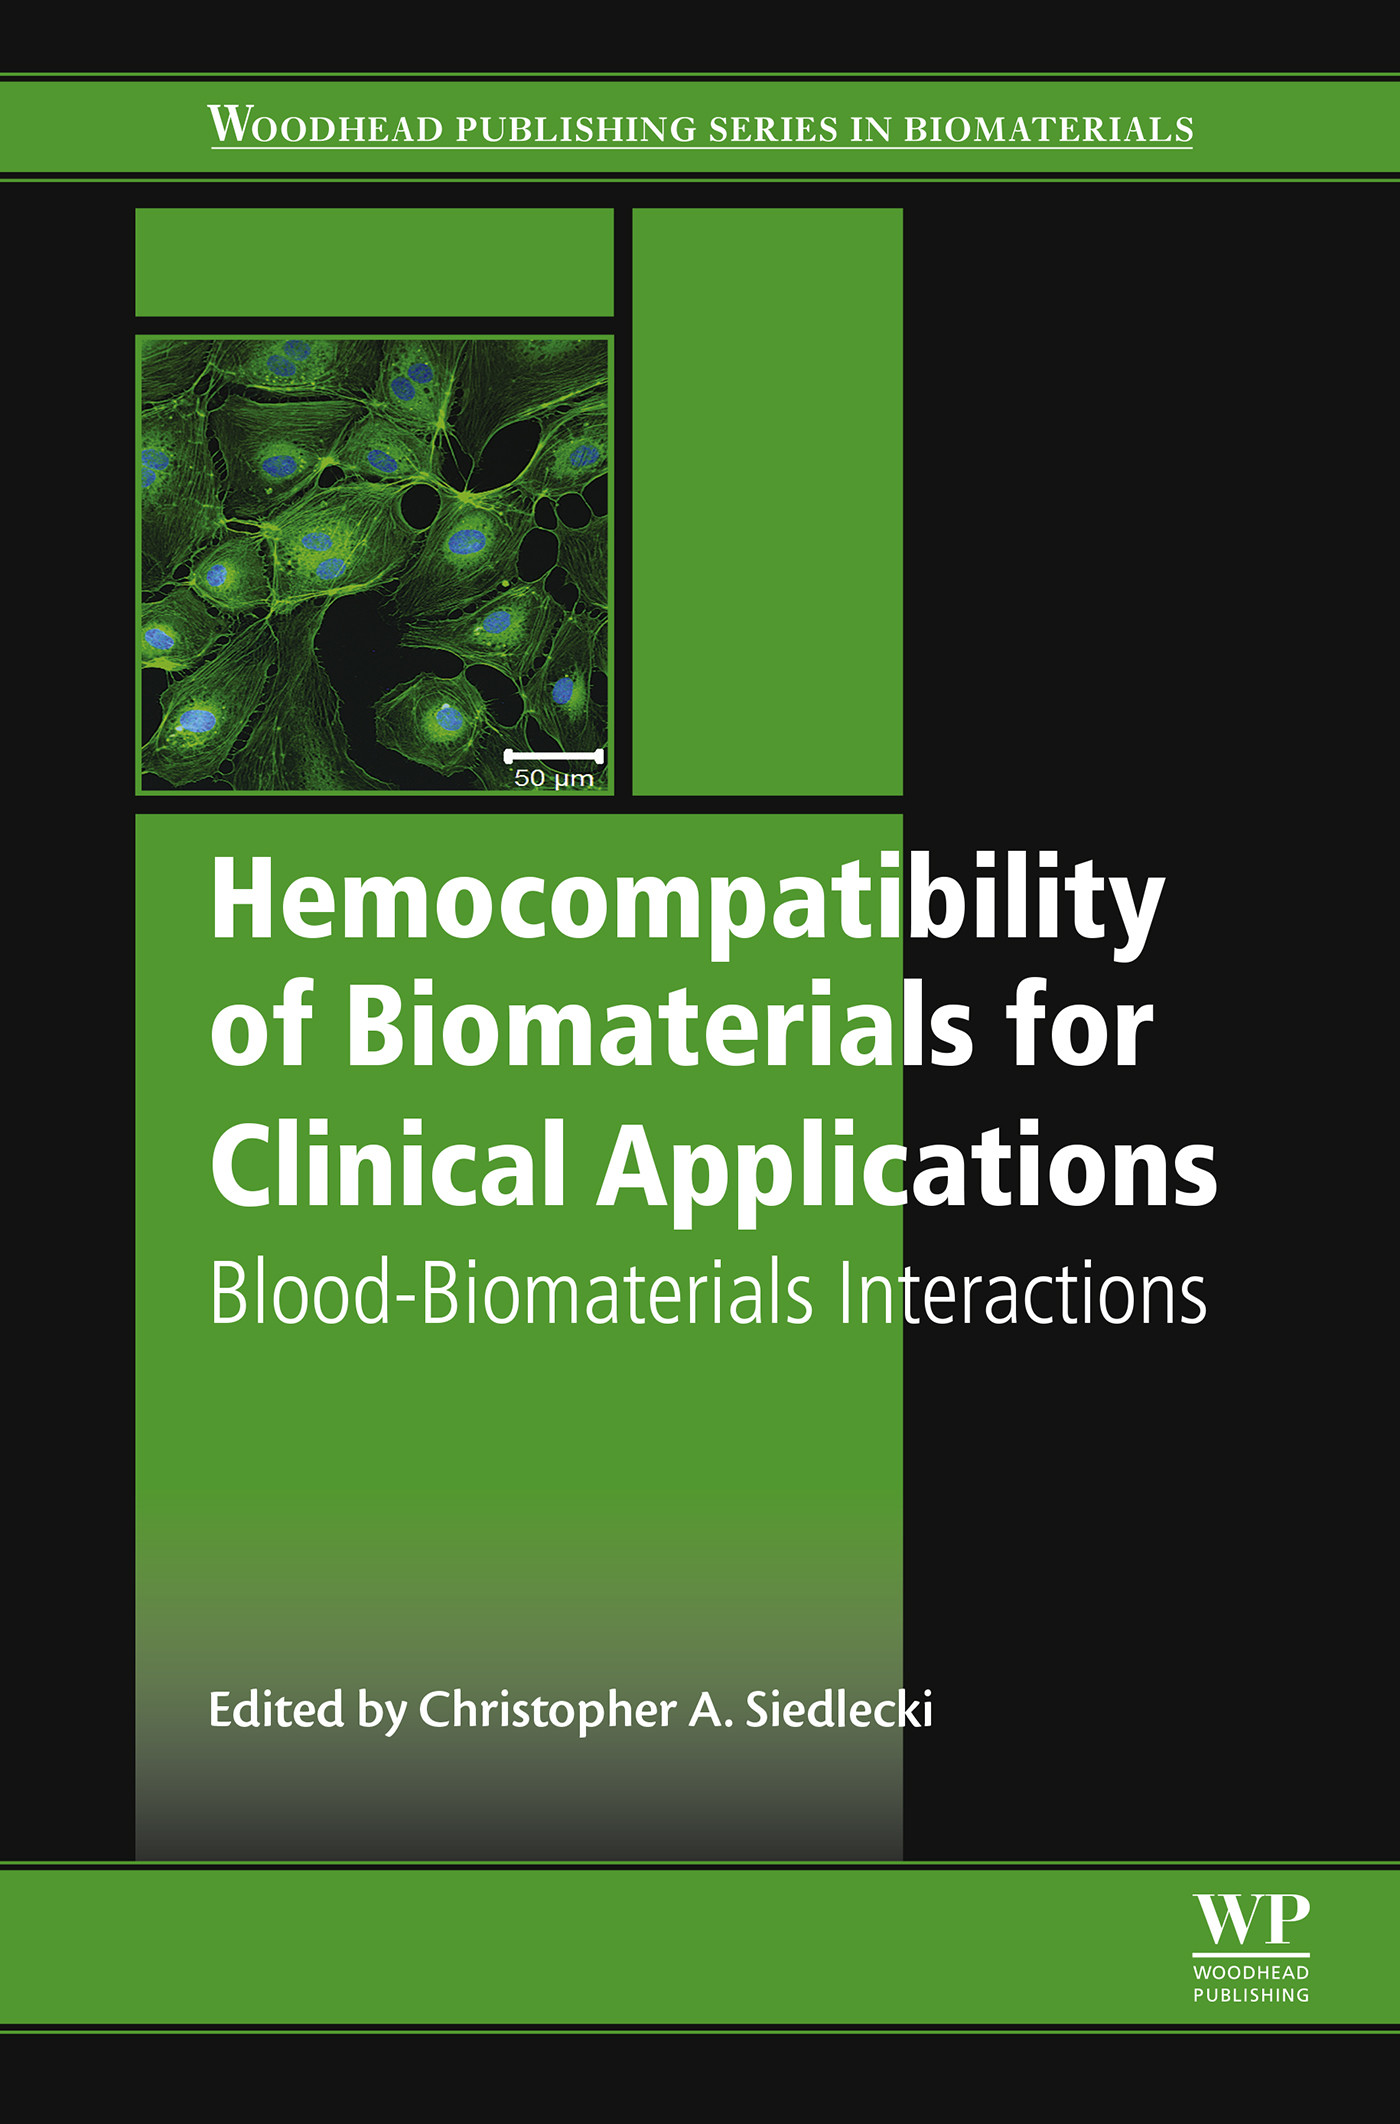 Hemocompatibility of Biomaterials for Clinical Applications